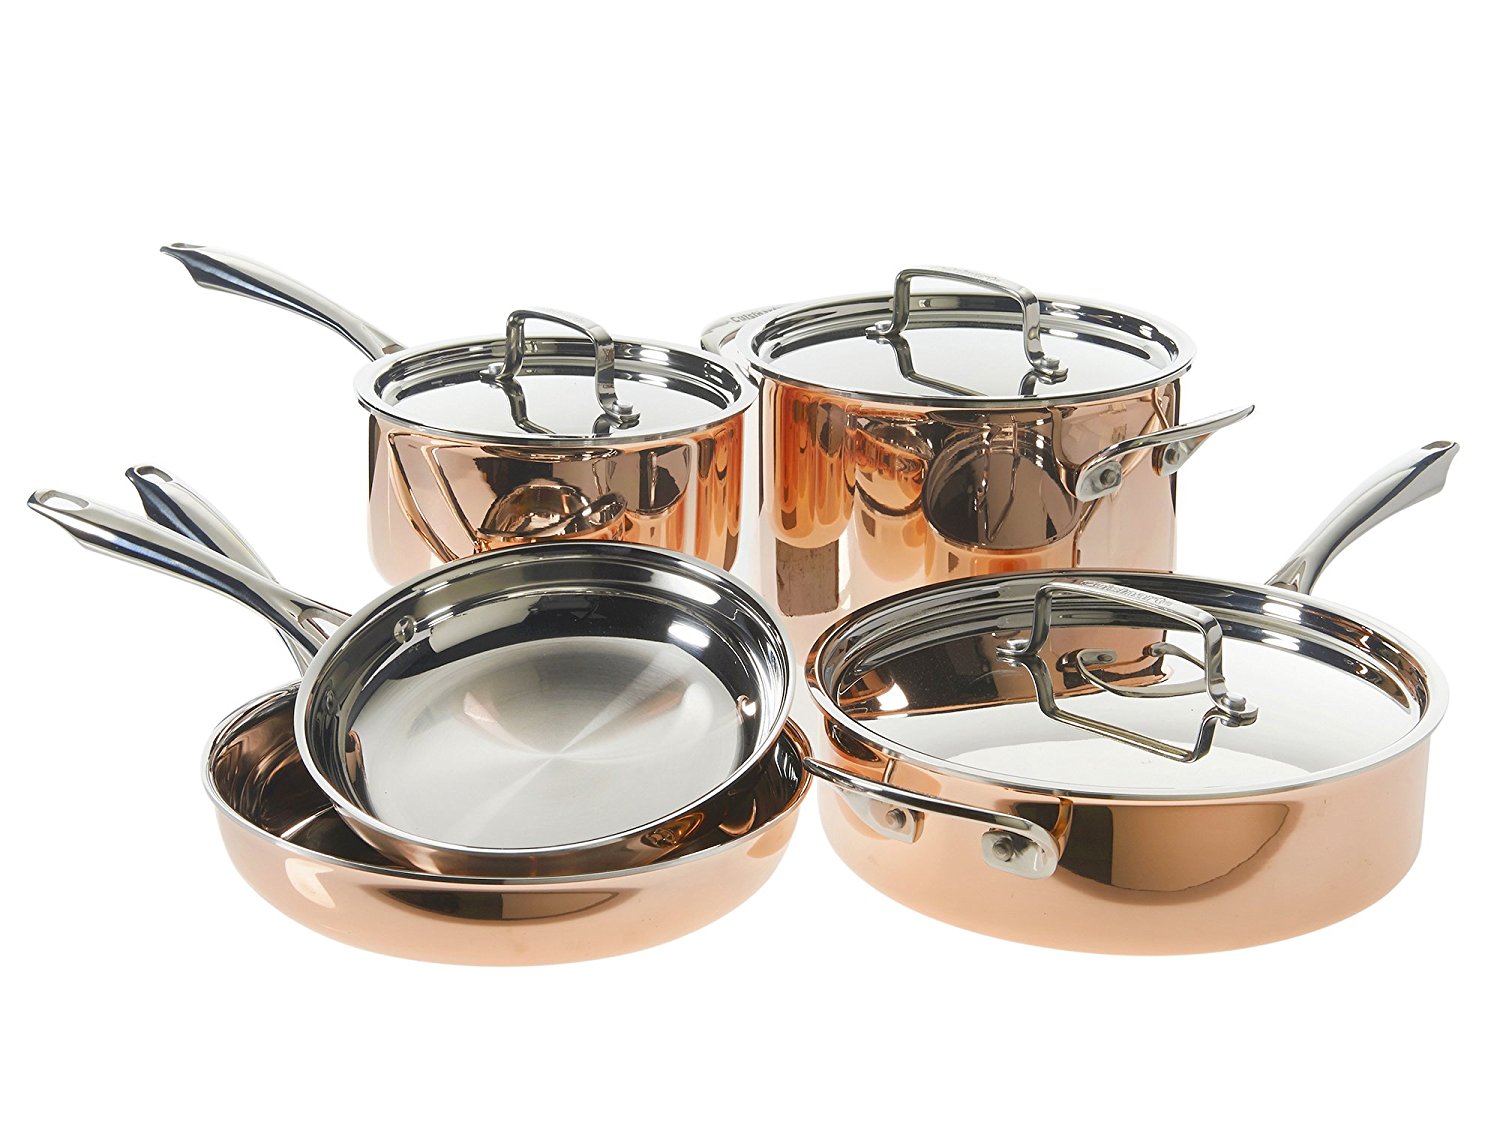 Cuisinart Tri-Ply Copper Cookware Set – Just $199.99!